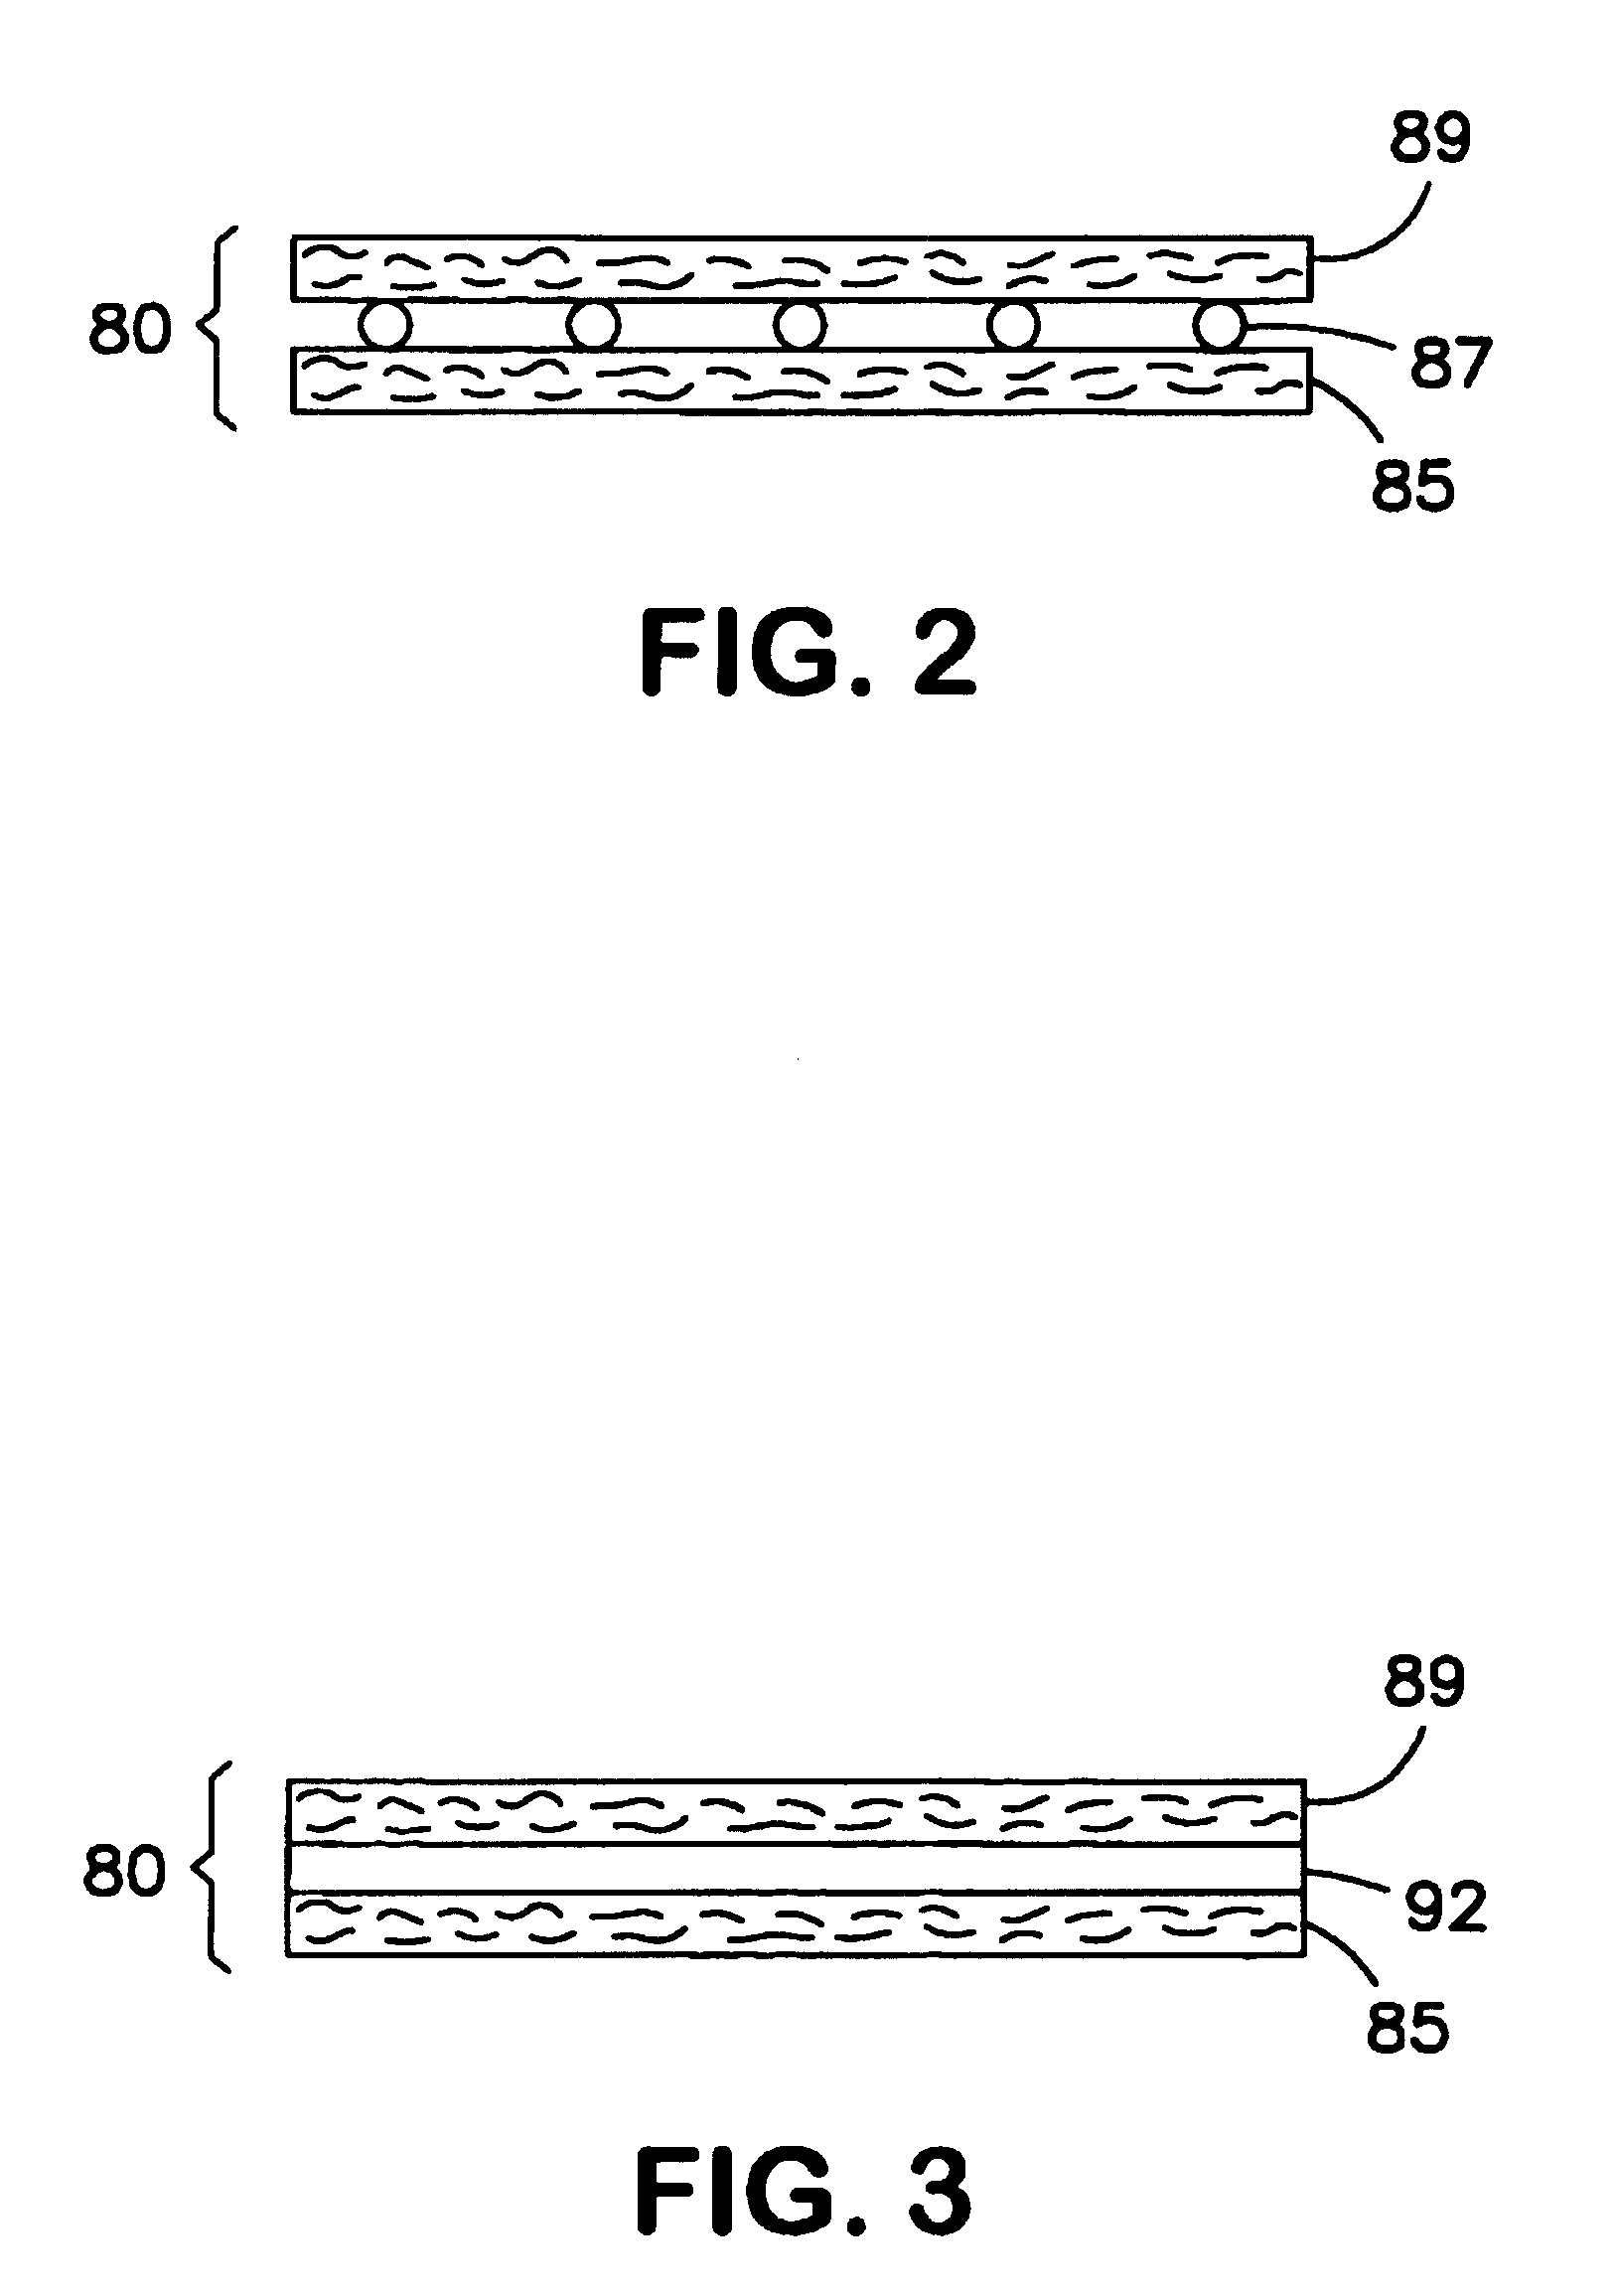 Filament-meltblown composite materials, and methods of making same